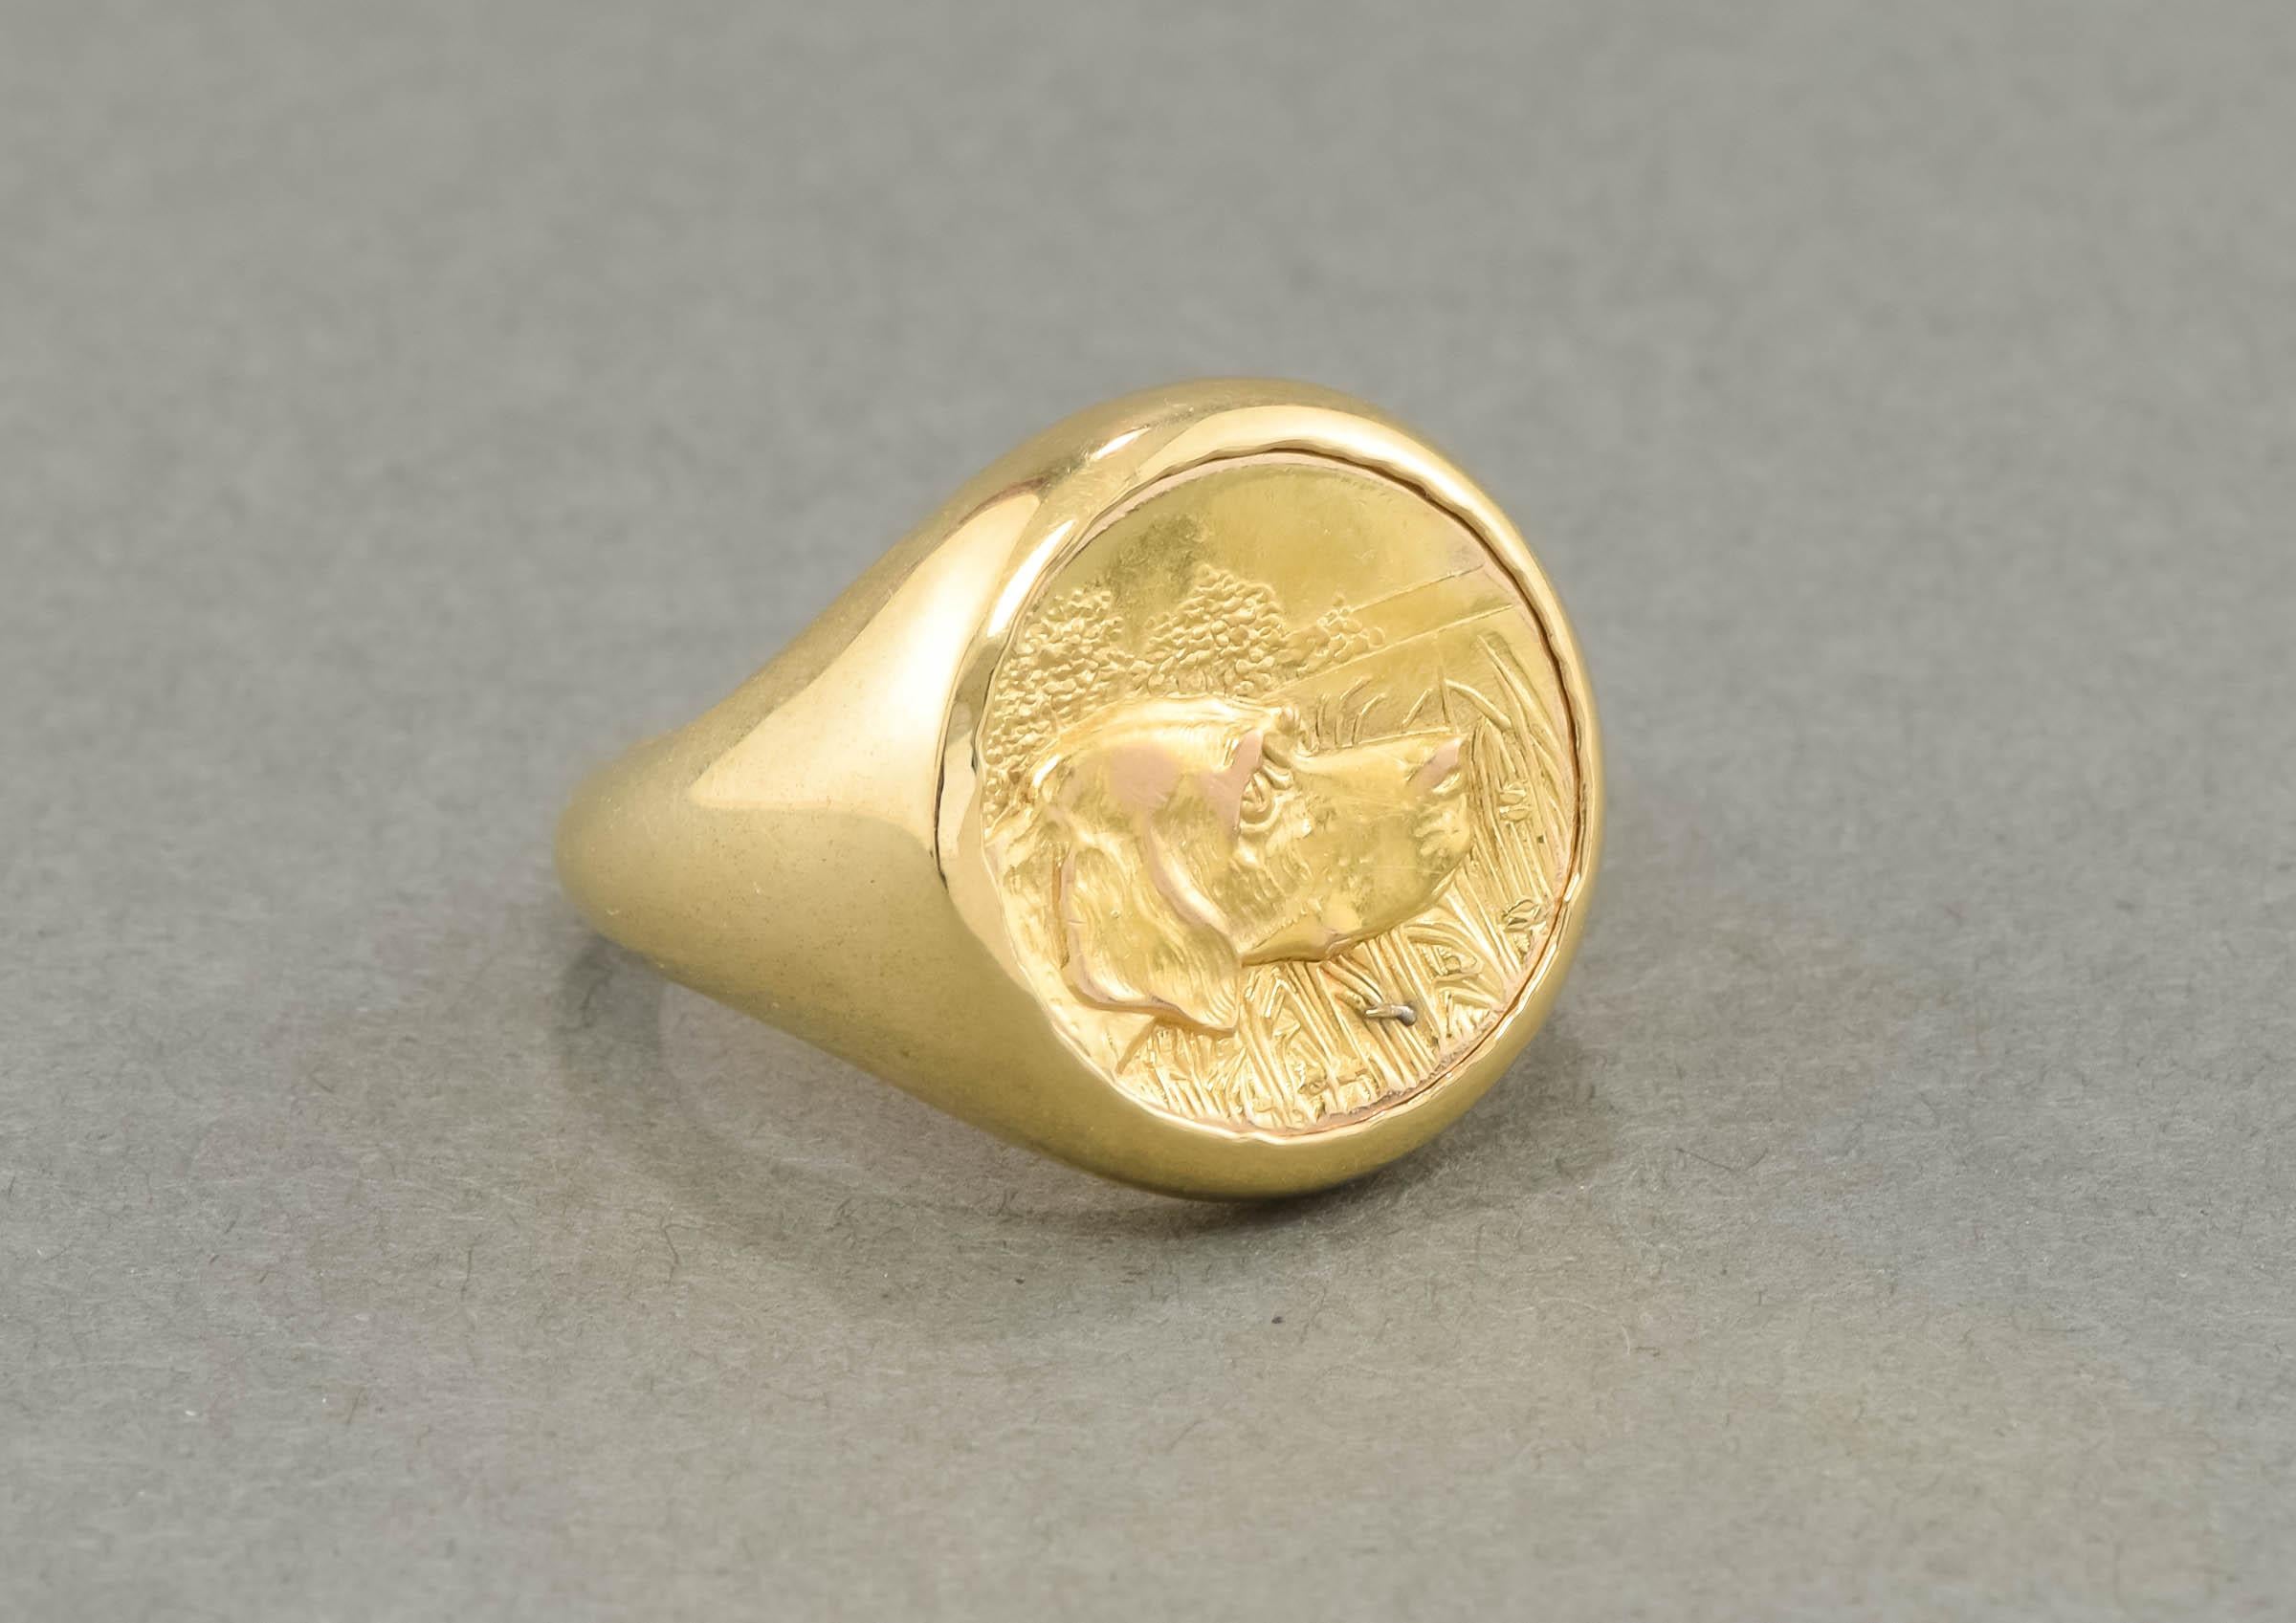 A lovely, one of a kind signet ring for a man or a woman, this beauty is both a substantial and elegant statement piece for the dog lover.  

Featuring an original Art Nouveau period plaque of a Retriever or Hound dog, the ring is 14K yellow gold,